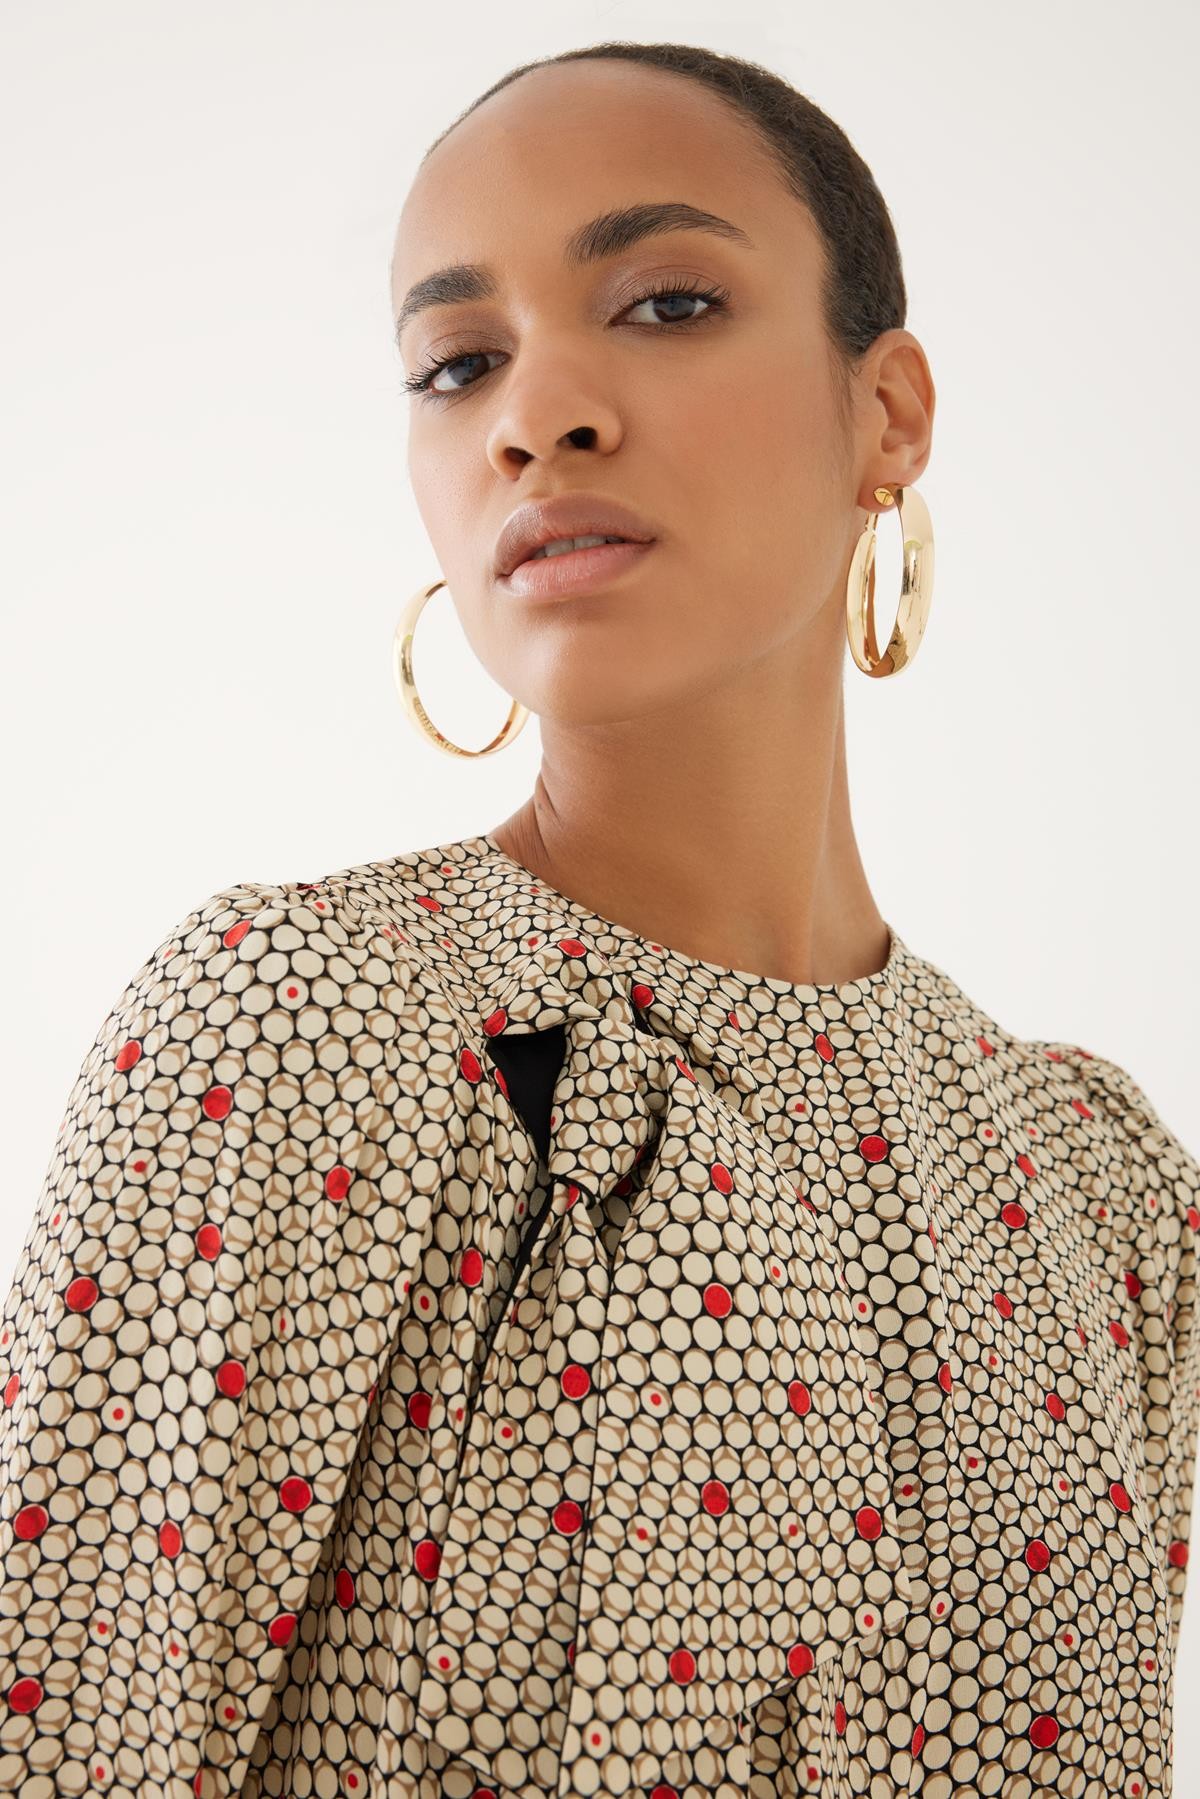 Honeycomb Patterned Blouse